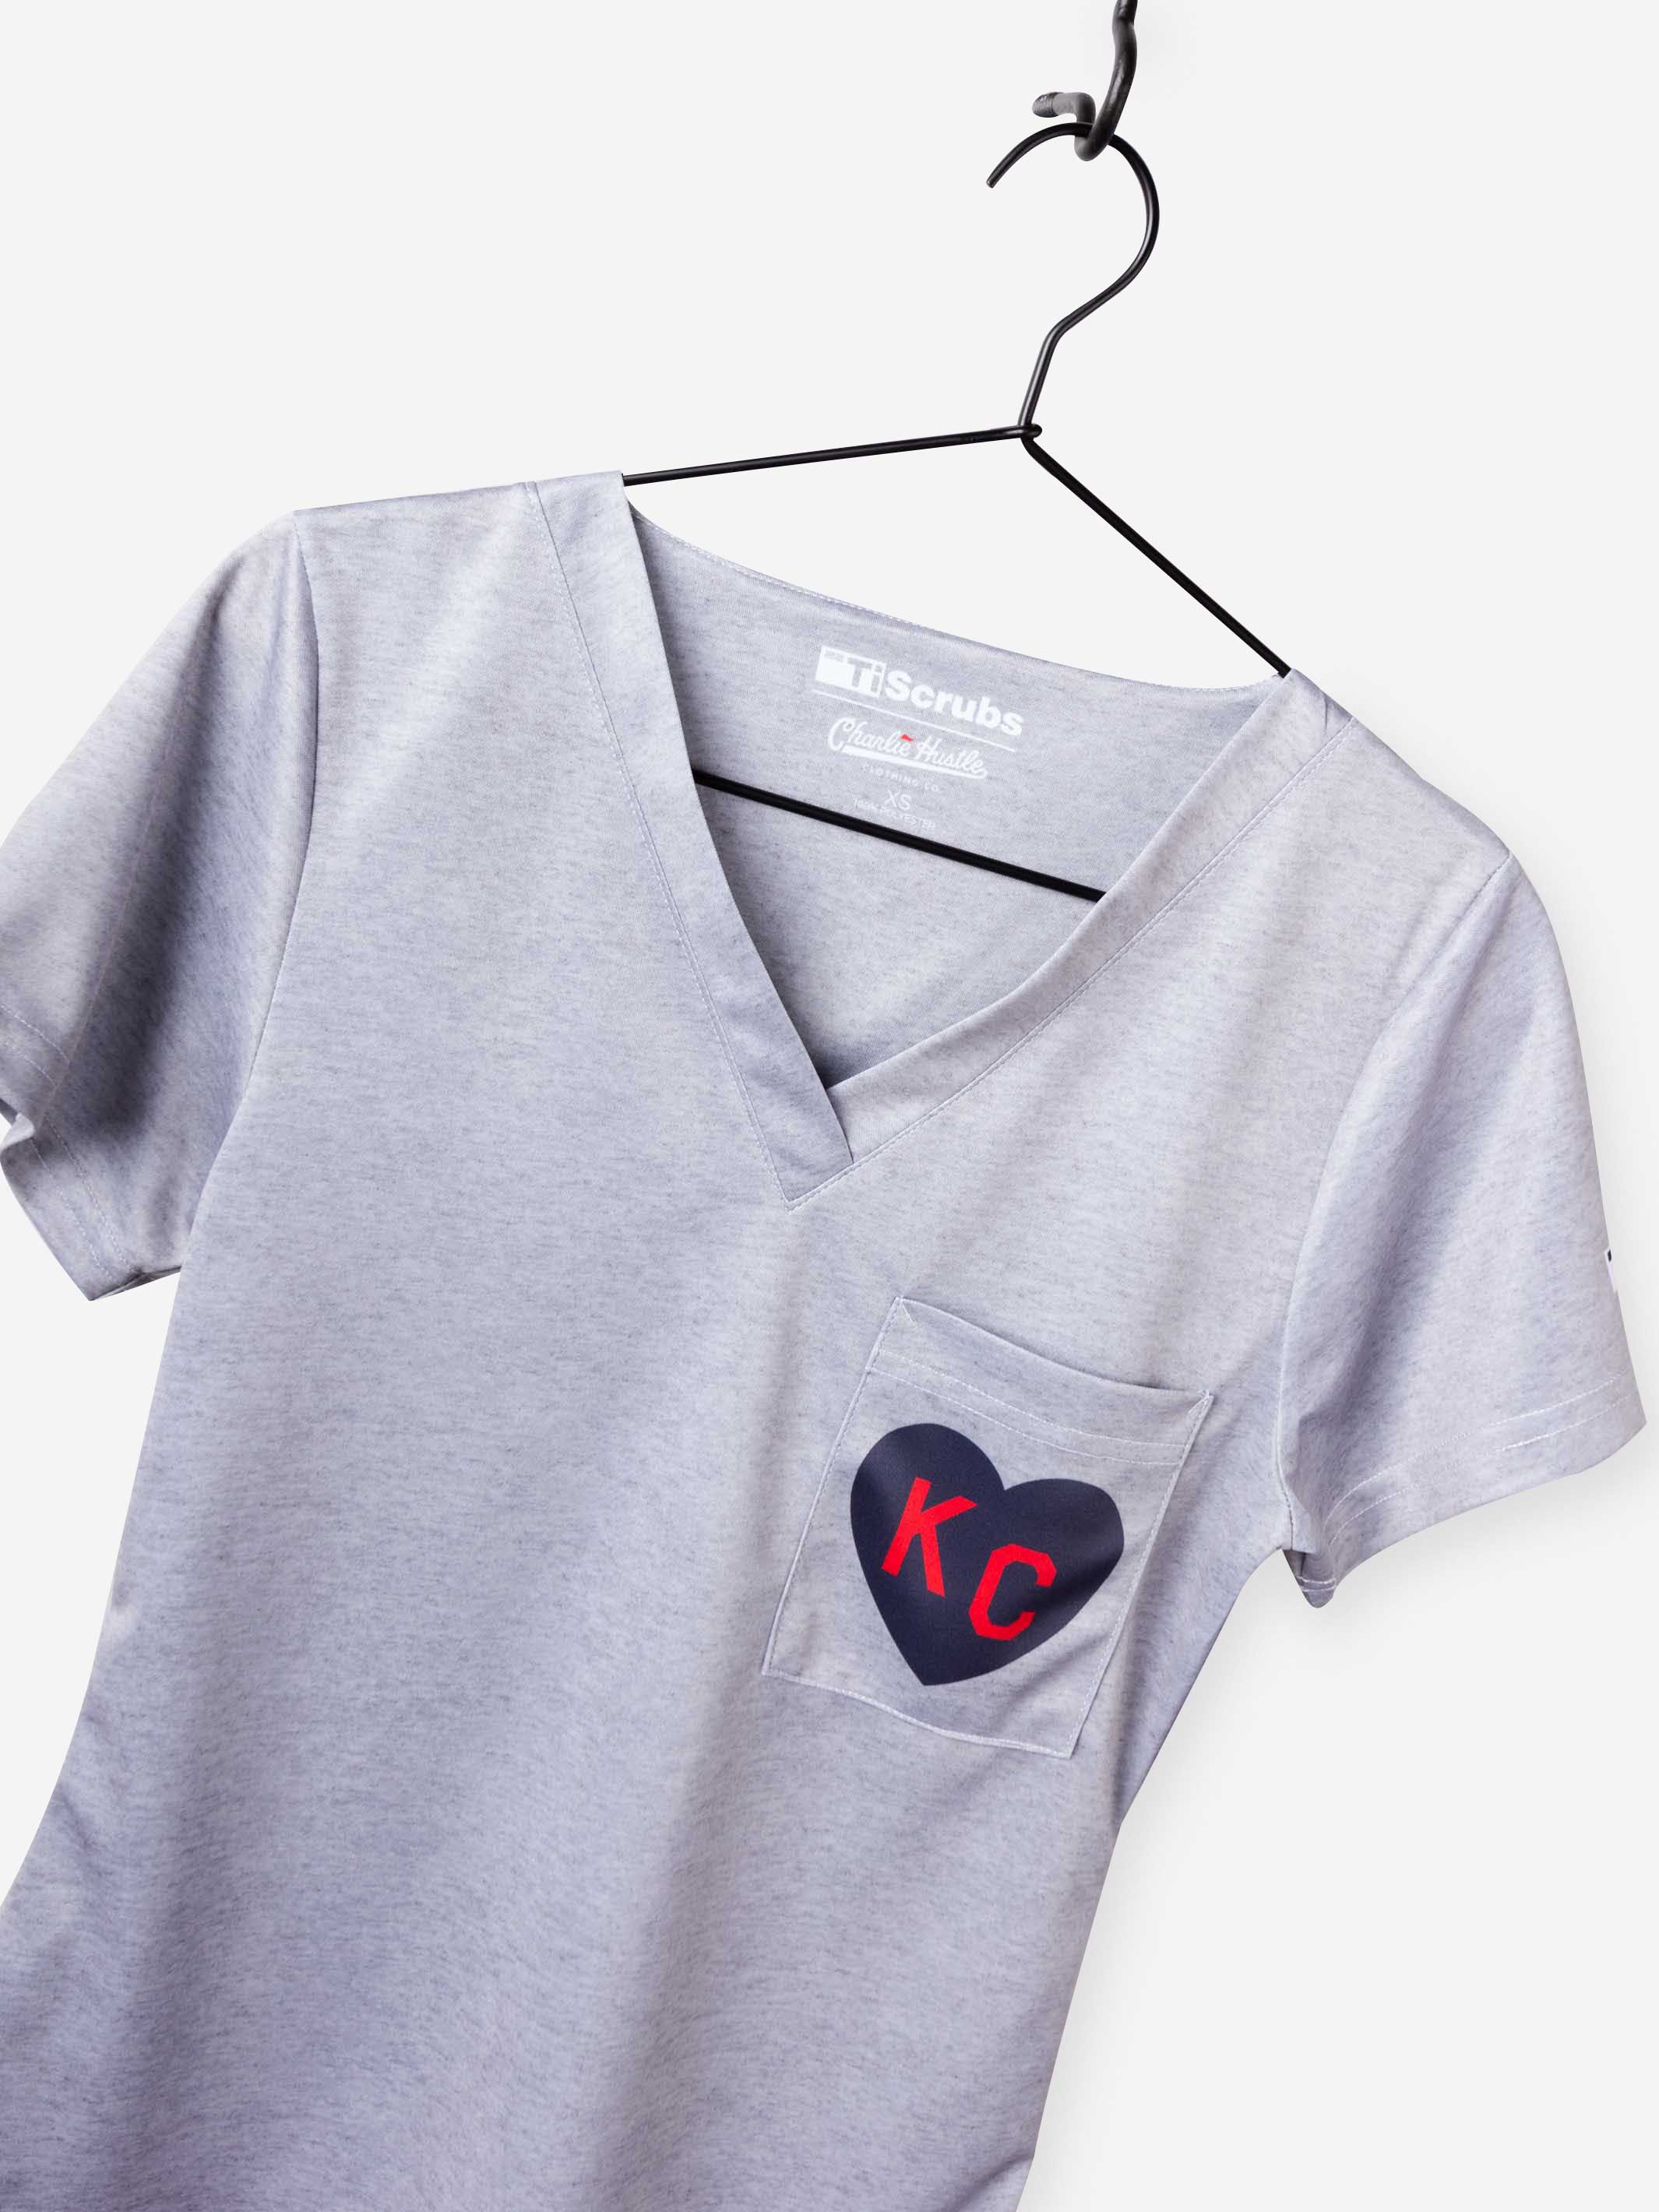 Women&#39;s Charlie Hustle Scrub Top KC Heart in Navy and Red Chest Pocket